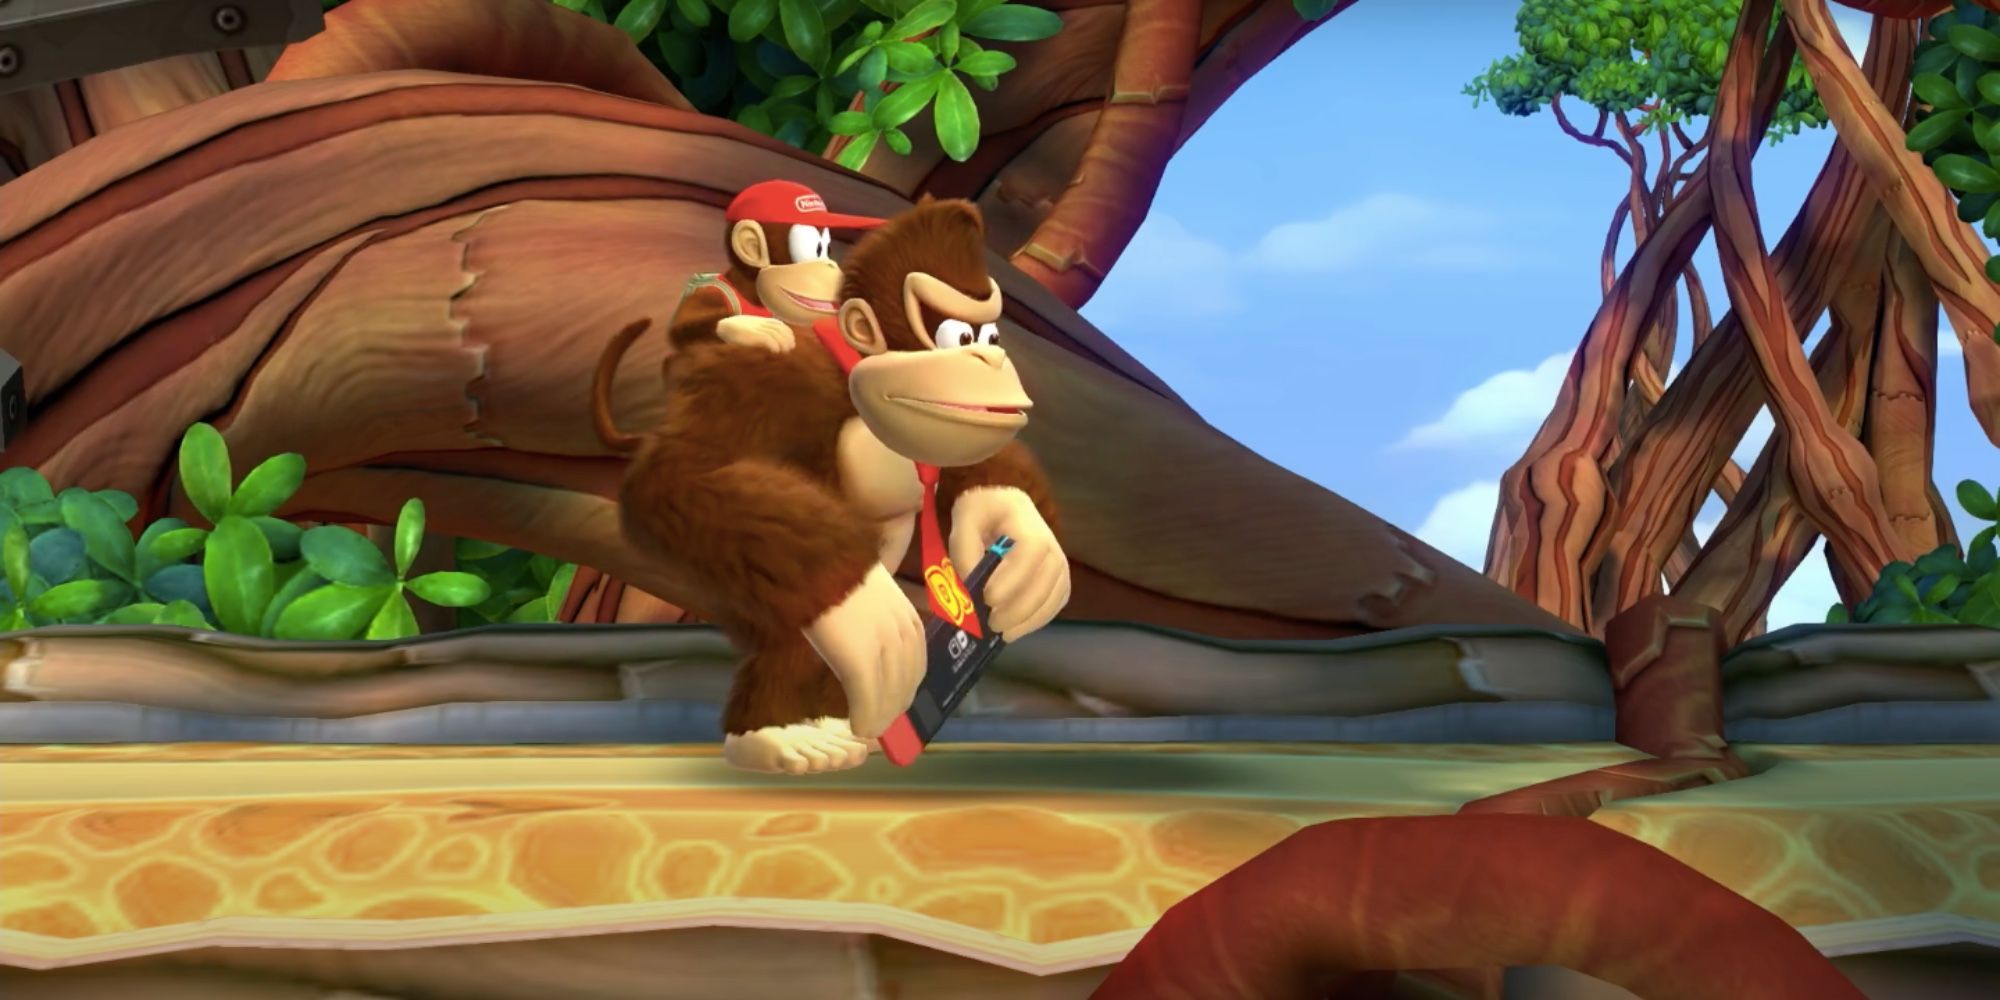 donkey kong and diddy kong standing together